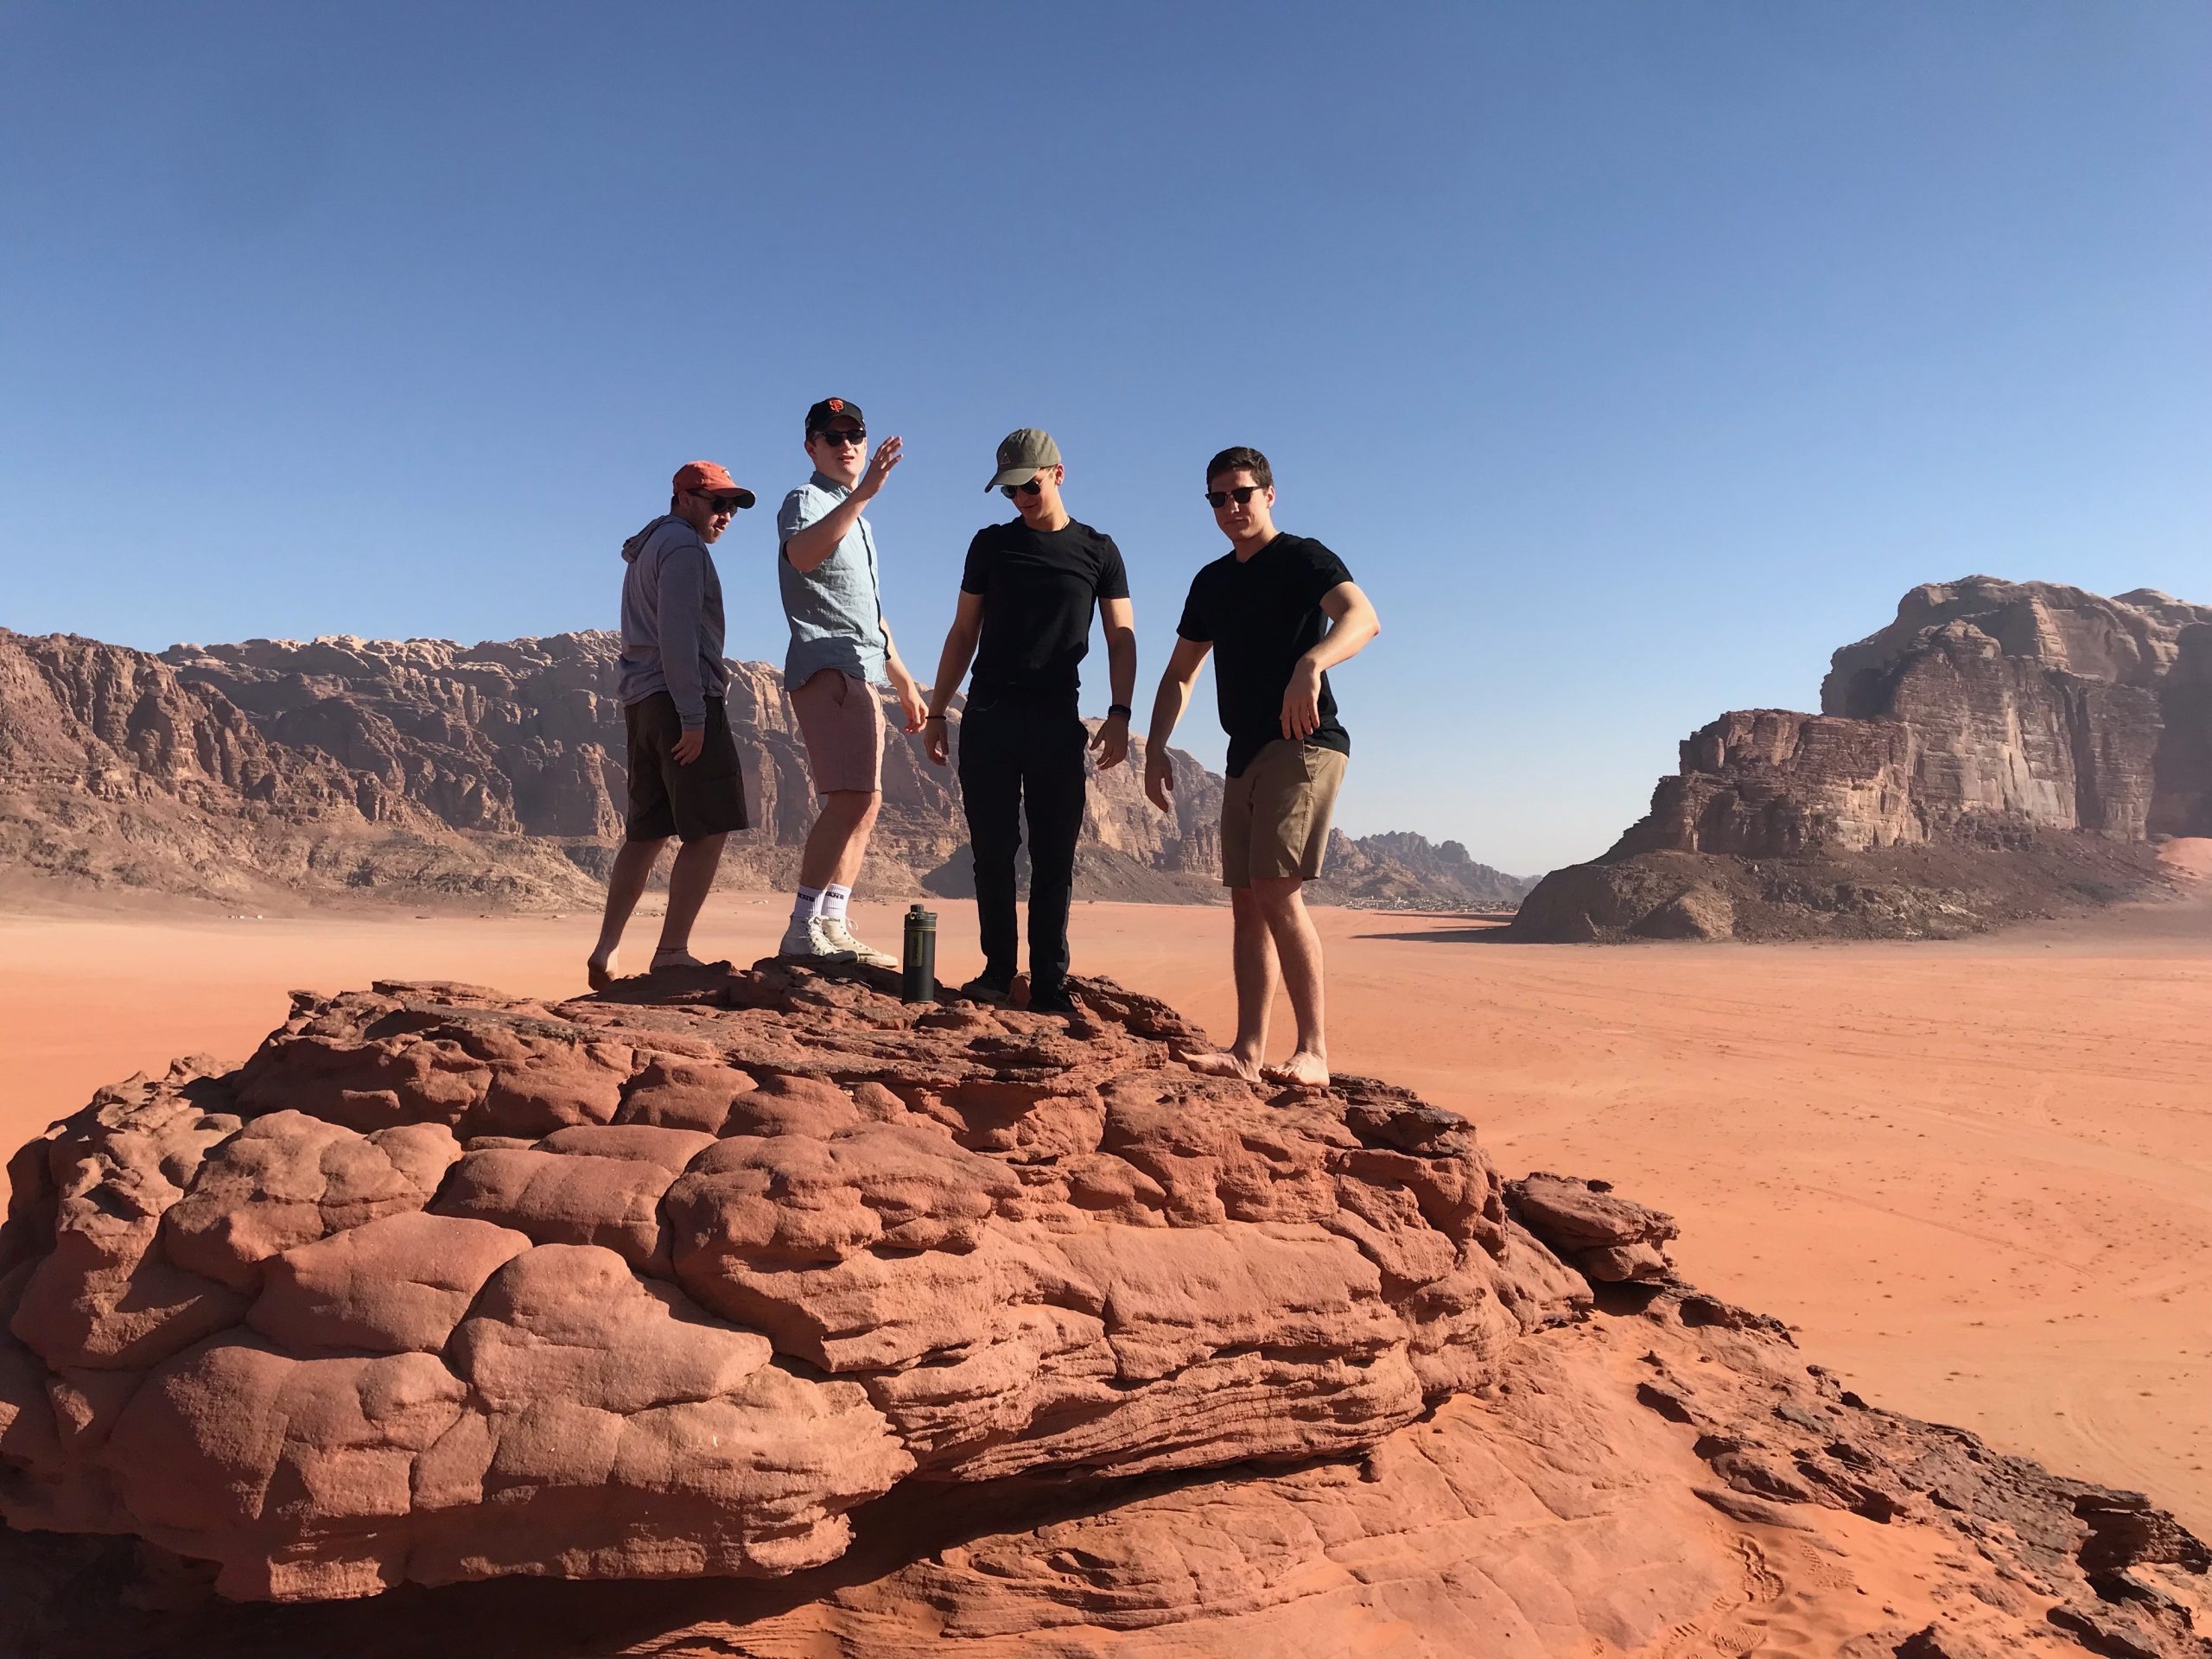 Four people posing for a picture in Wadi Rum in Jordan